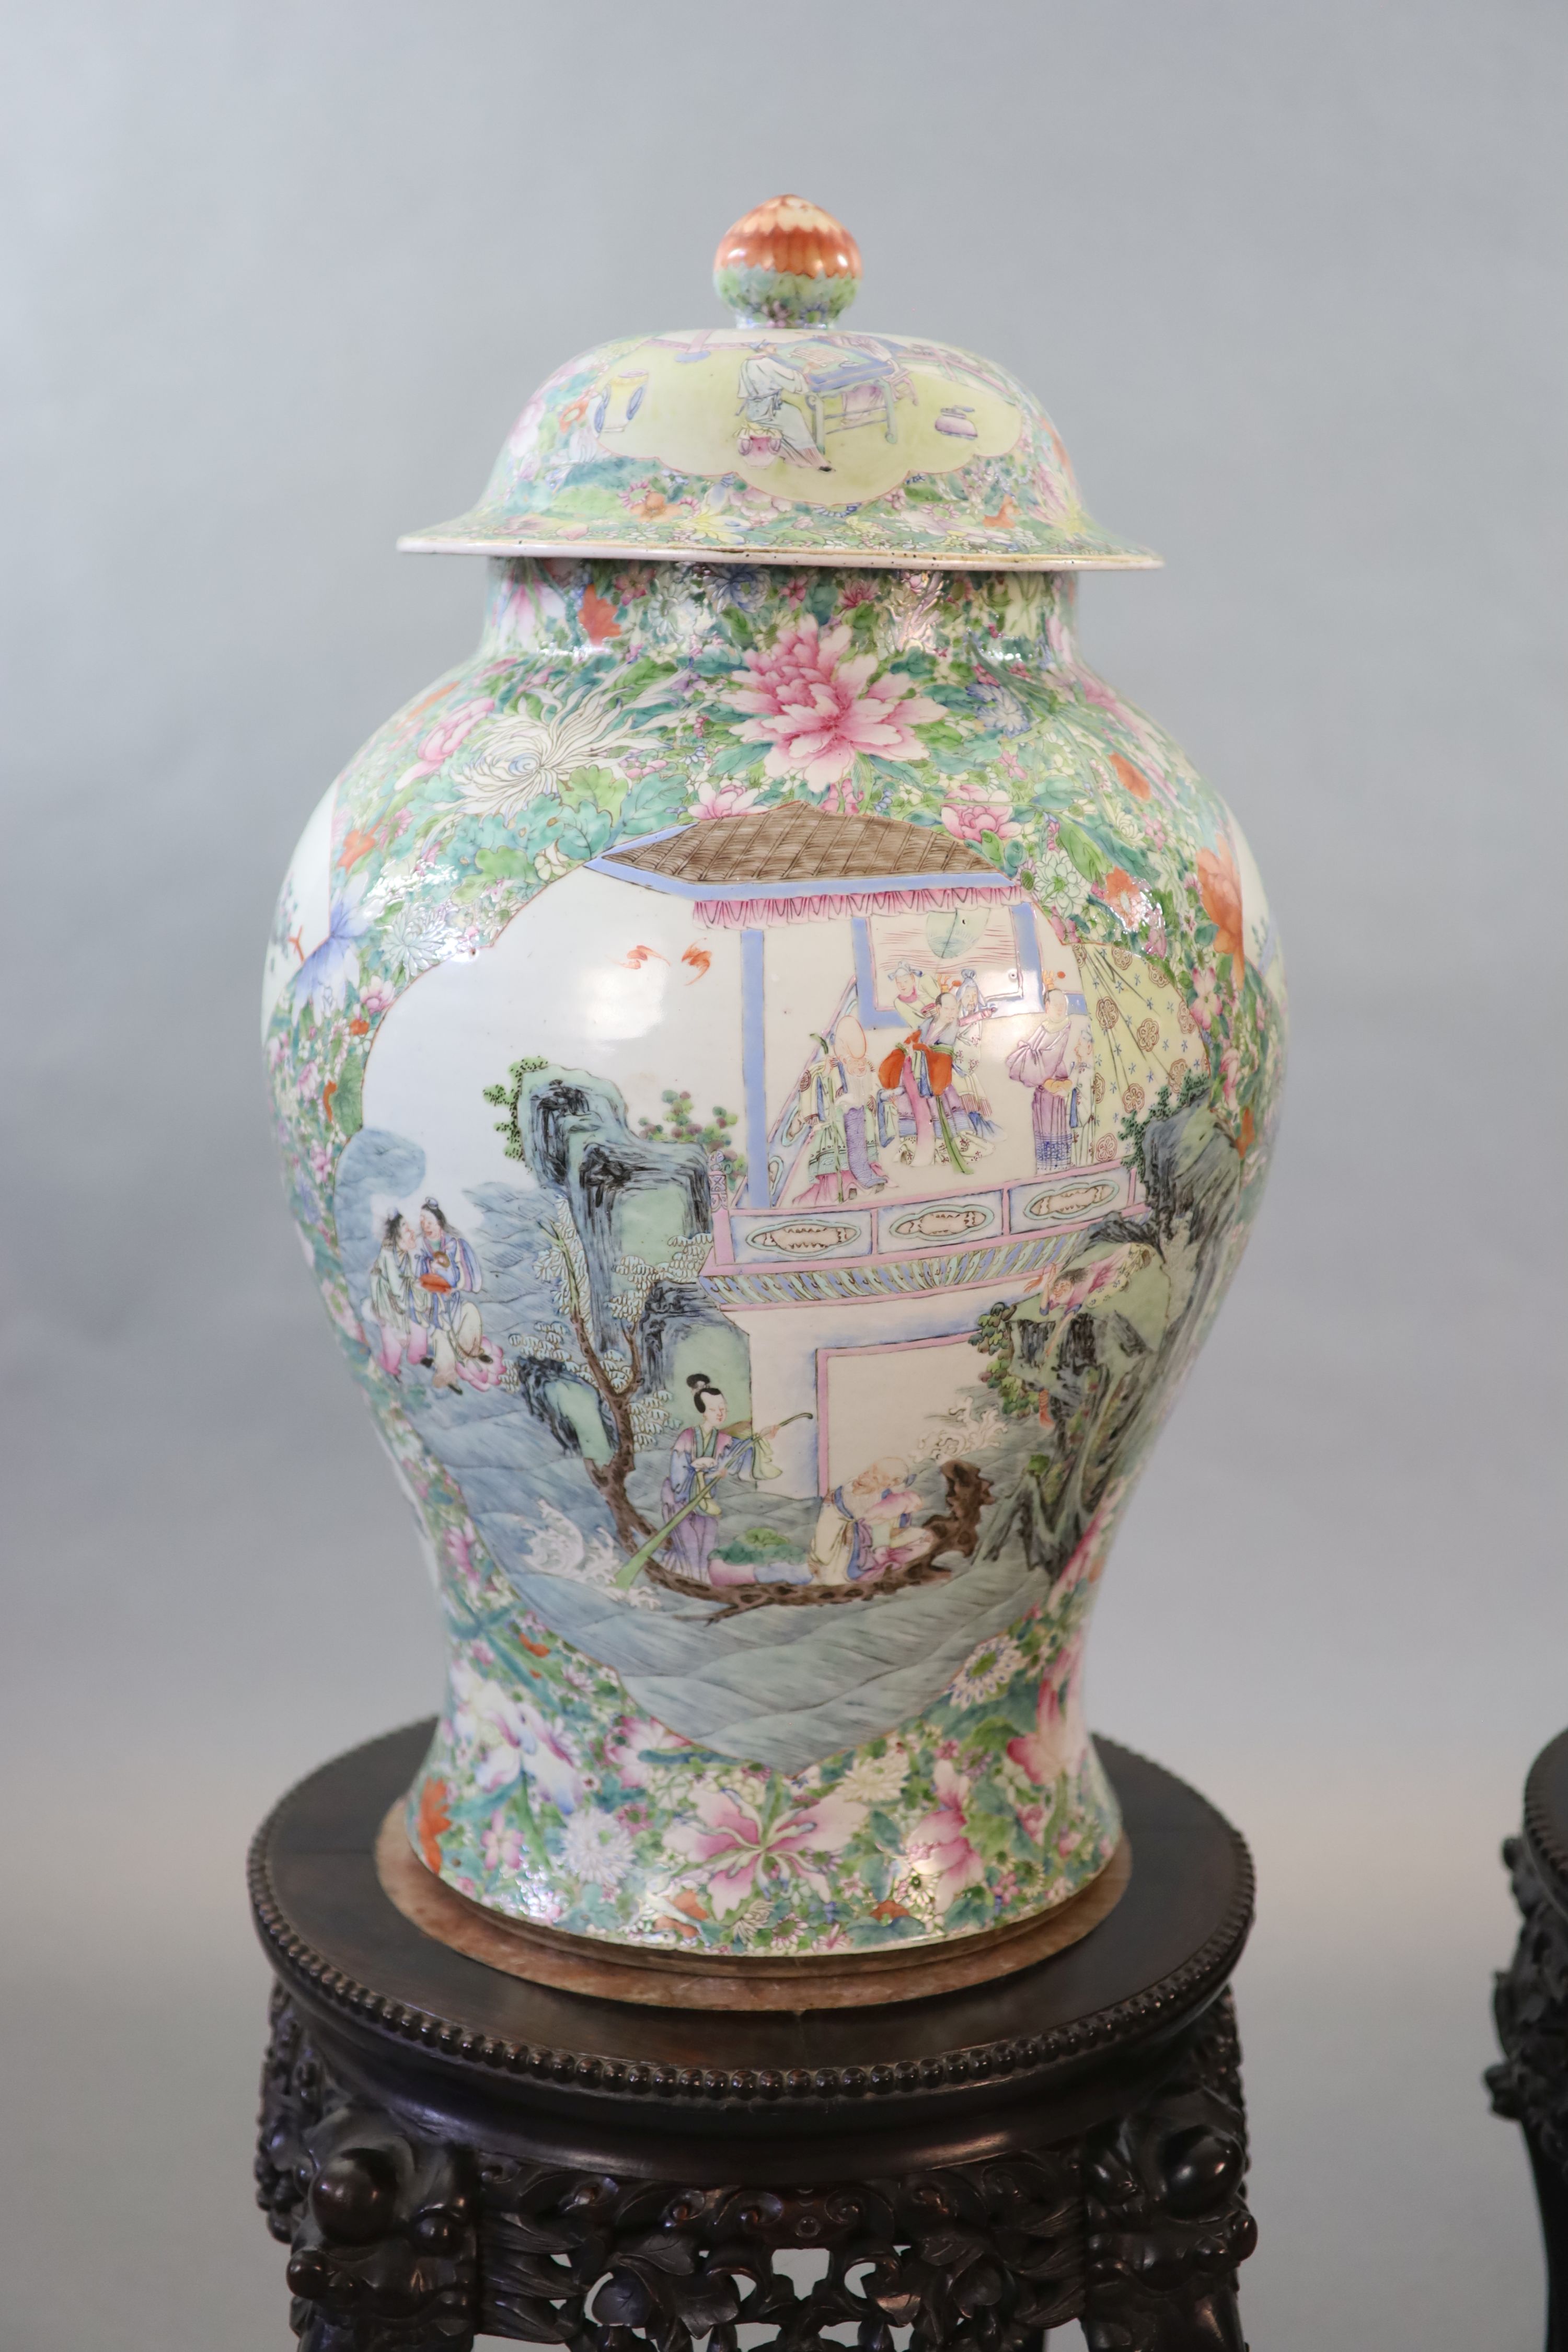 An impressive pair of Chinese famille rose ‘eight immortals’ vases and covers, late 19th century, Total height 113.5 cm including stands